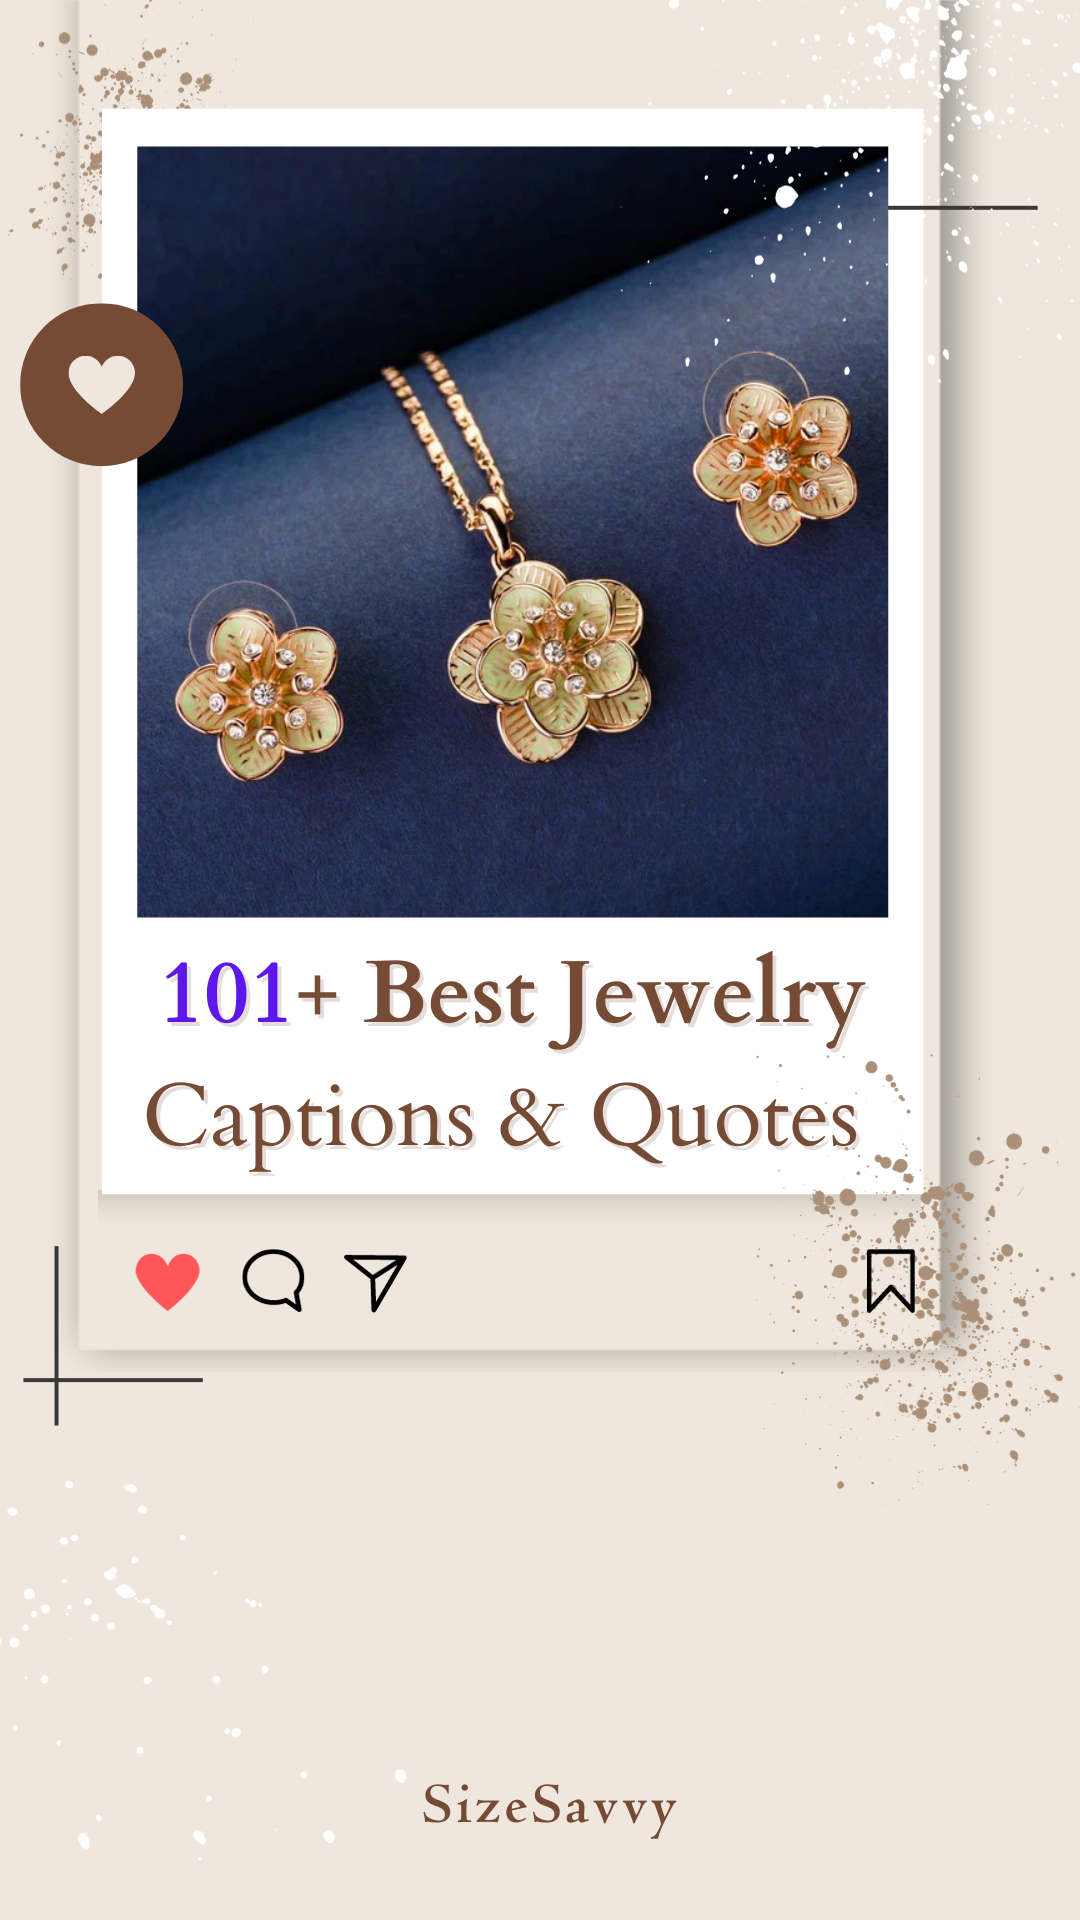 outre_official - Let your accessories bring out your true personality # earrings #fashionaccessory #fashion #quote #shoplocal #sg #earrings  #flowers #botanicaldesign #statementearrings #tomford #fashionstatement  #fashion #quotes #ootd #fashion #forsale ...